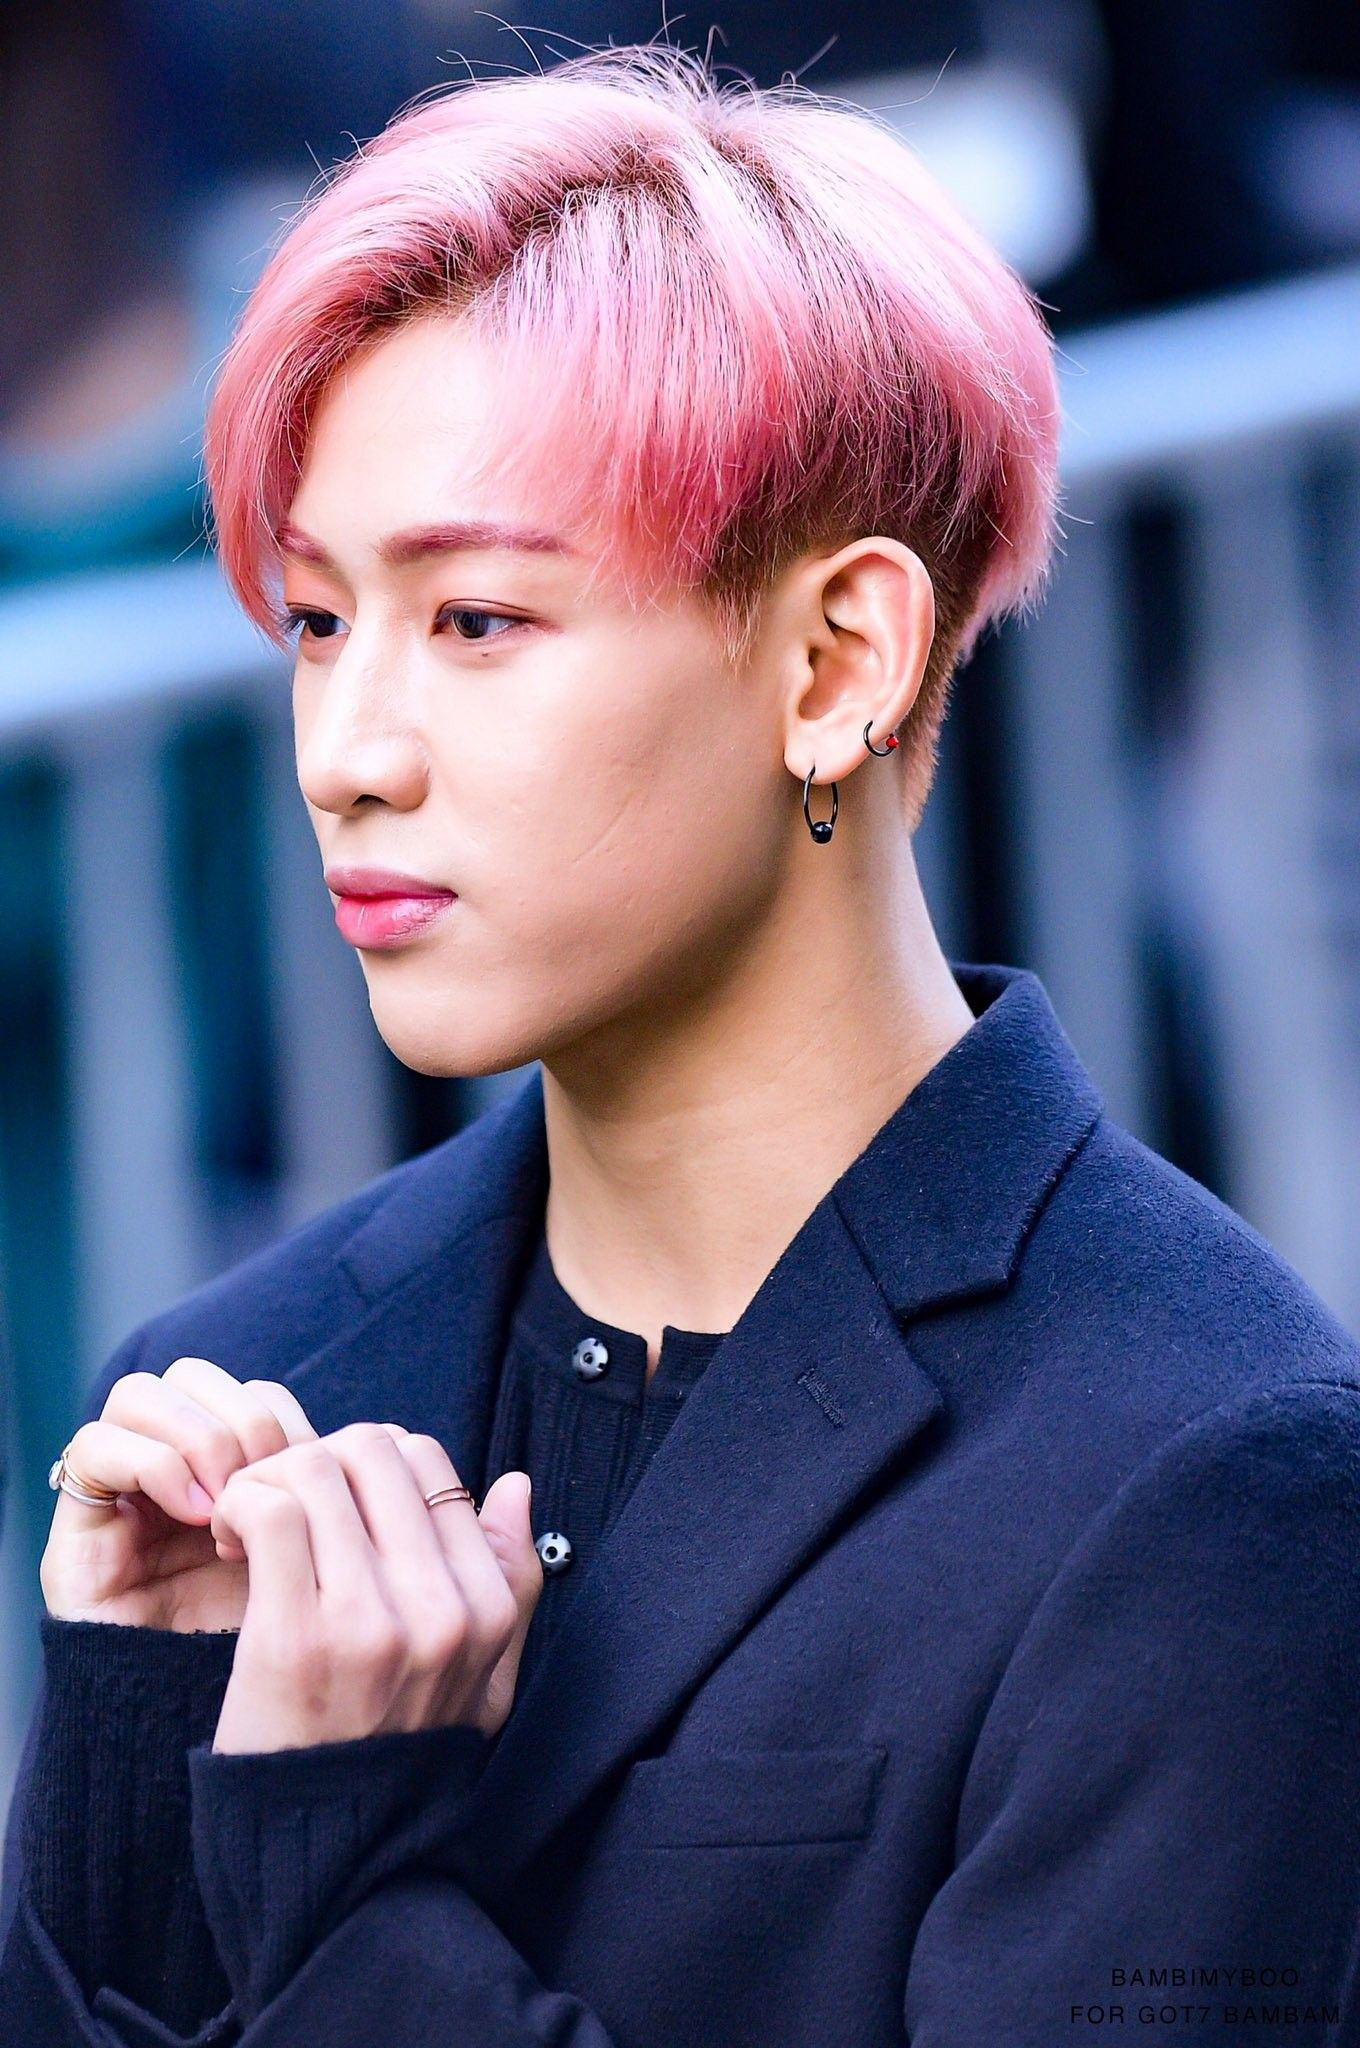 Pin by LUV JINSSONG on BAMBAM GOT7 | Bambam, Pink hair, Style